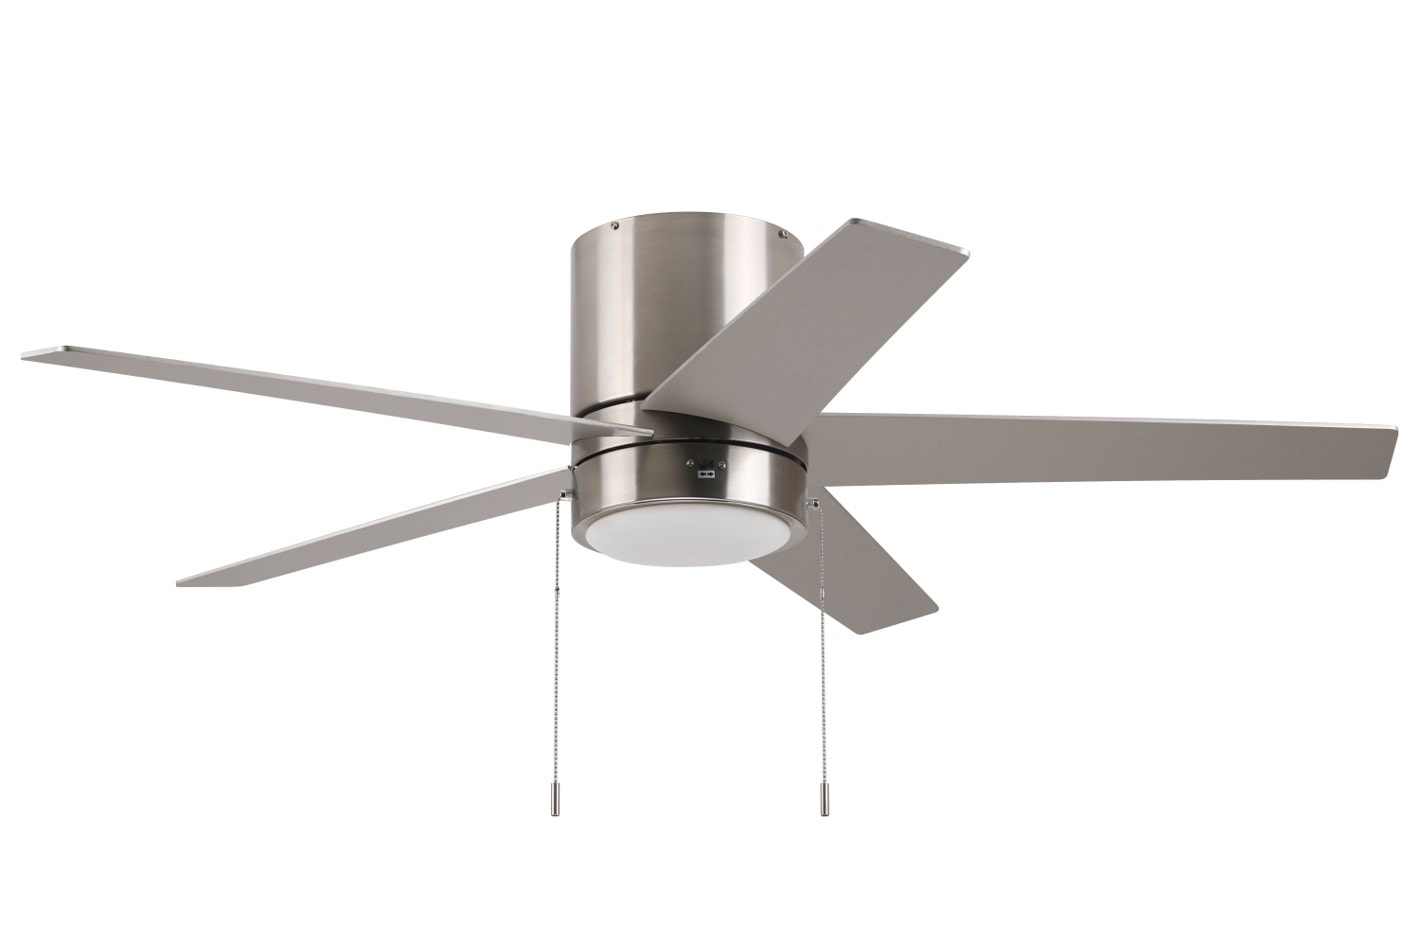 52" Contemporary Ceiling Fan with LED Panel Light